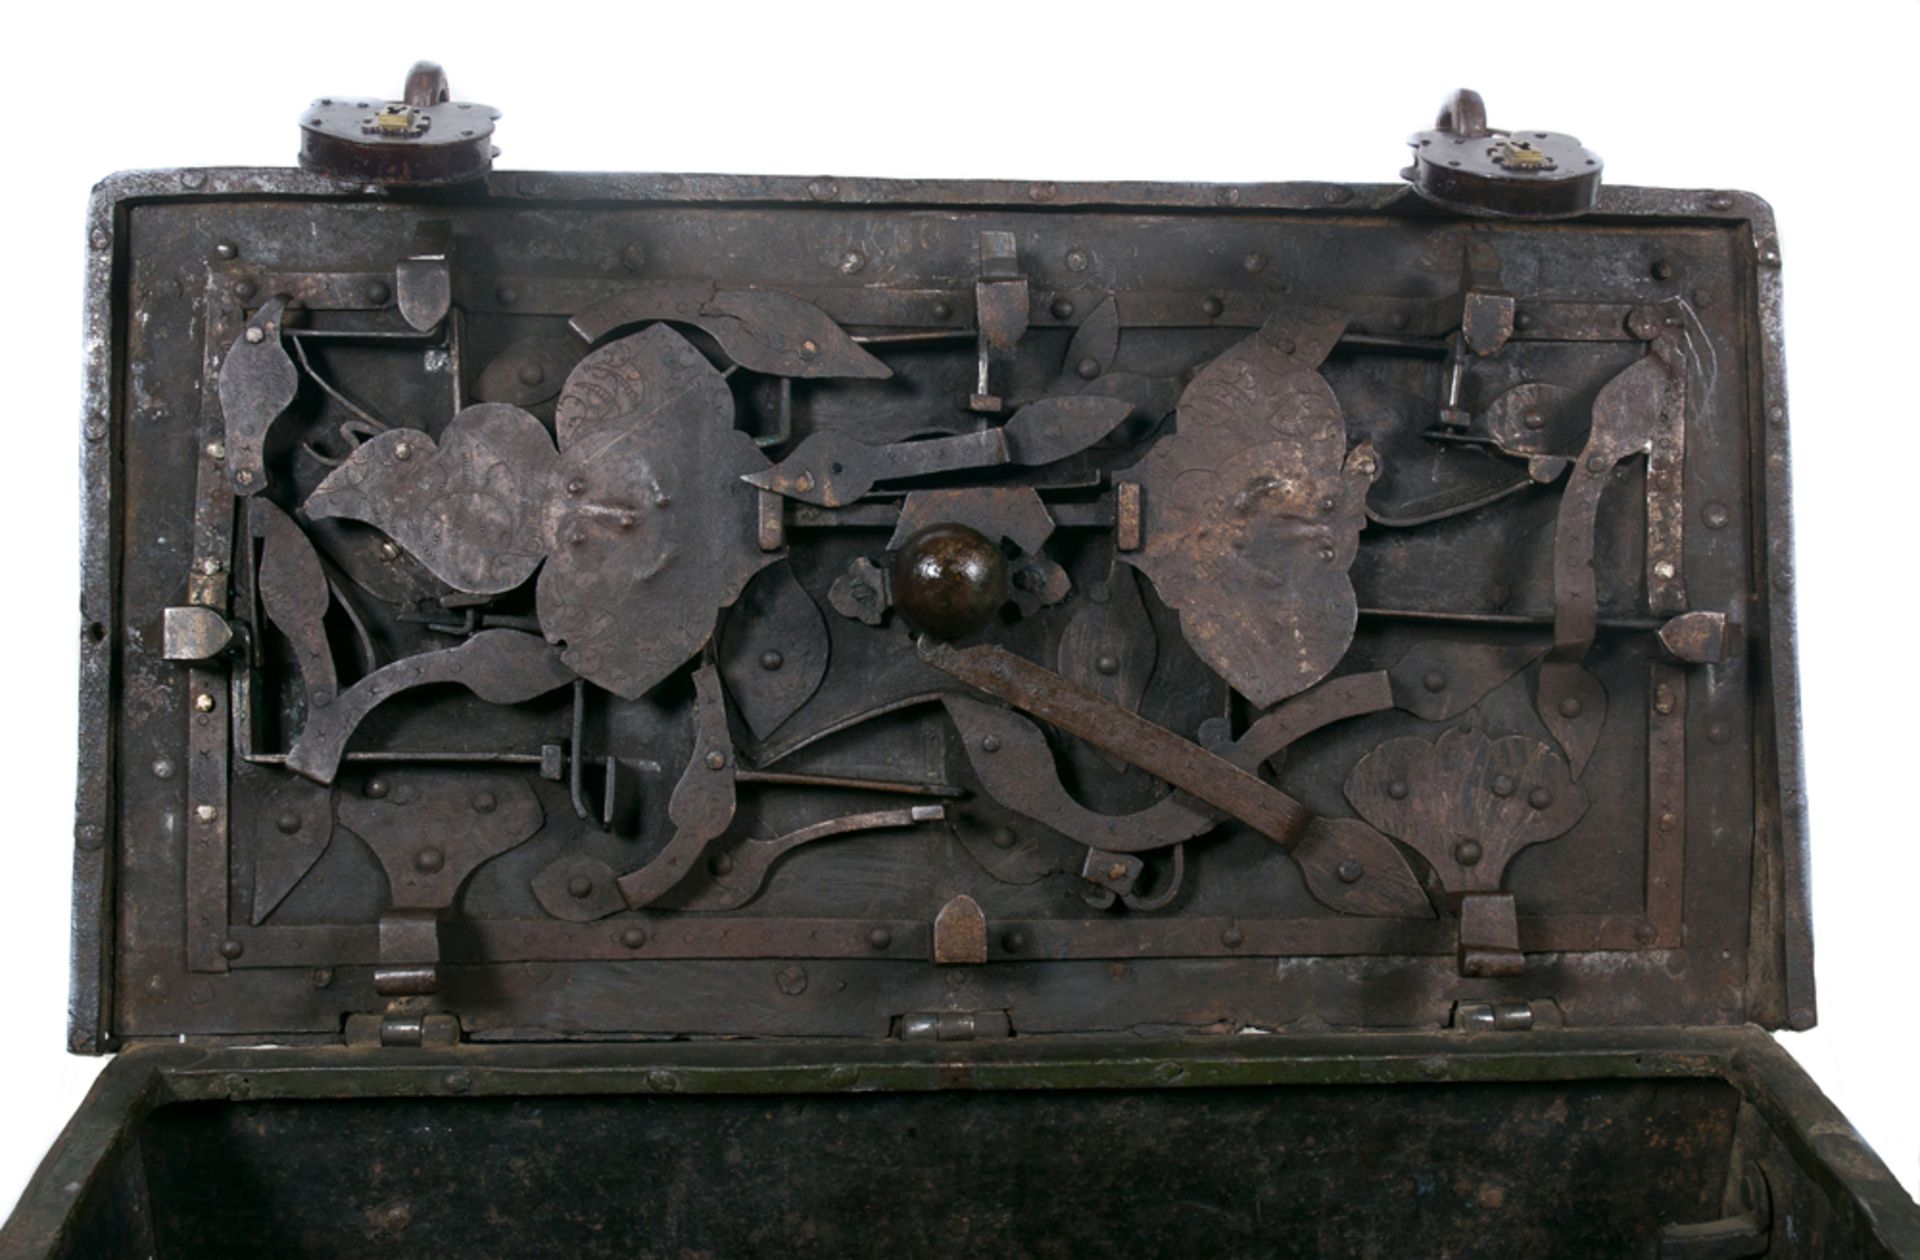 Wrought iron strong box. Nuremberg or Augsburg. Late 16th century. - Image 4 of 6